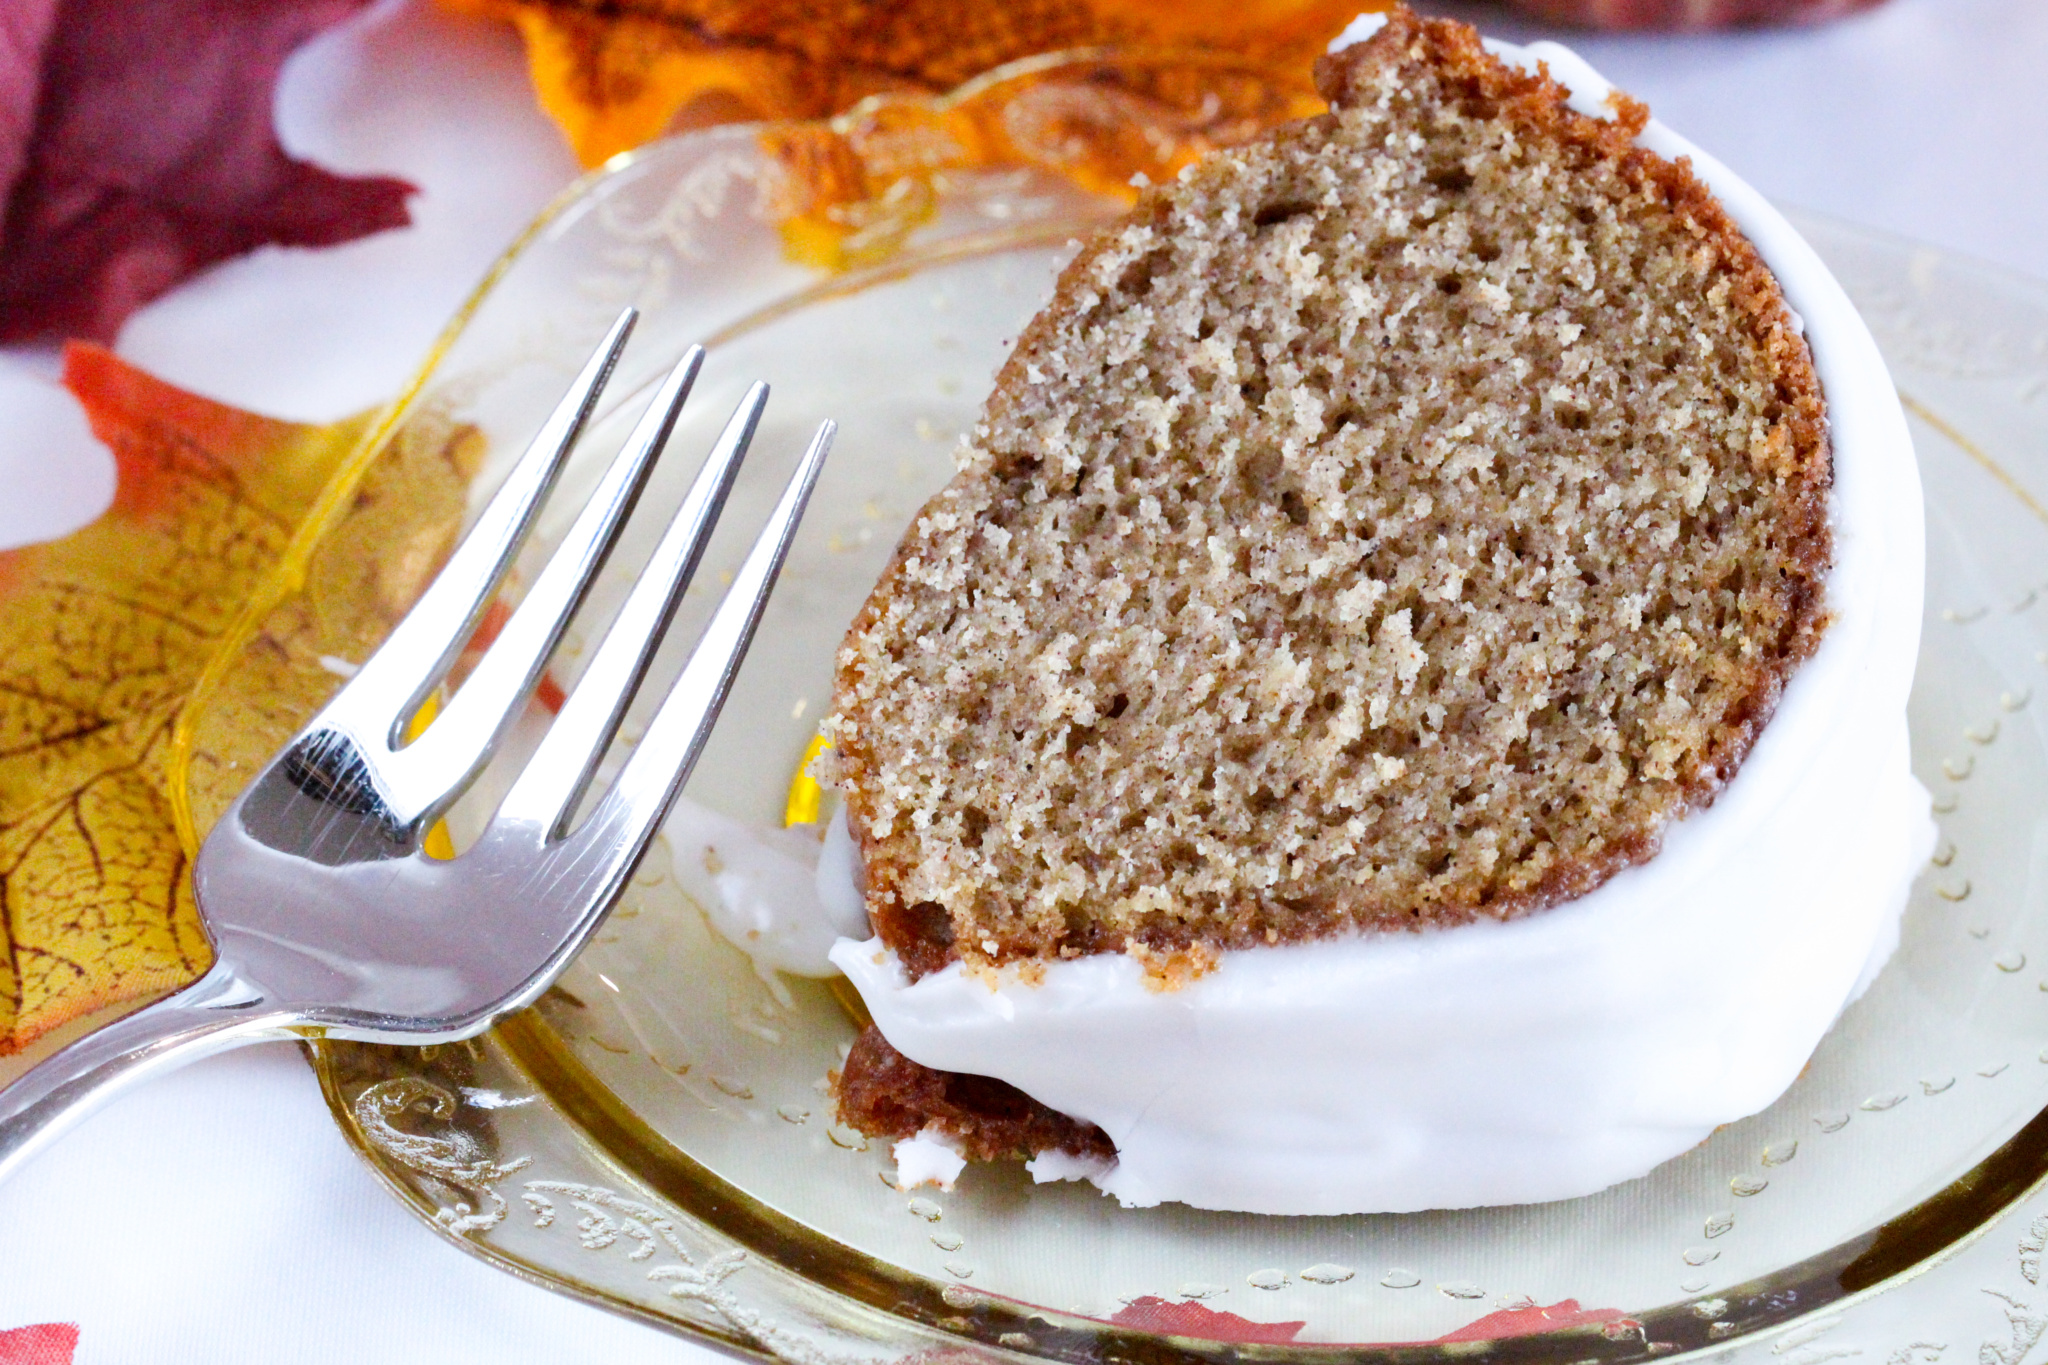 Six spices combine to infuse Chai Spice Cake with delicious flavor. With a generous drizzle of Cream Cheese Glaze, this showstopper will wow your guests! Recipe shared with permission granted by Jenny Kales, author of CALLIE'S KITCHEN MYSTERIES COOKBOOK. 